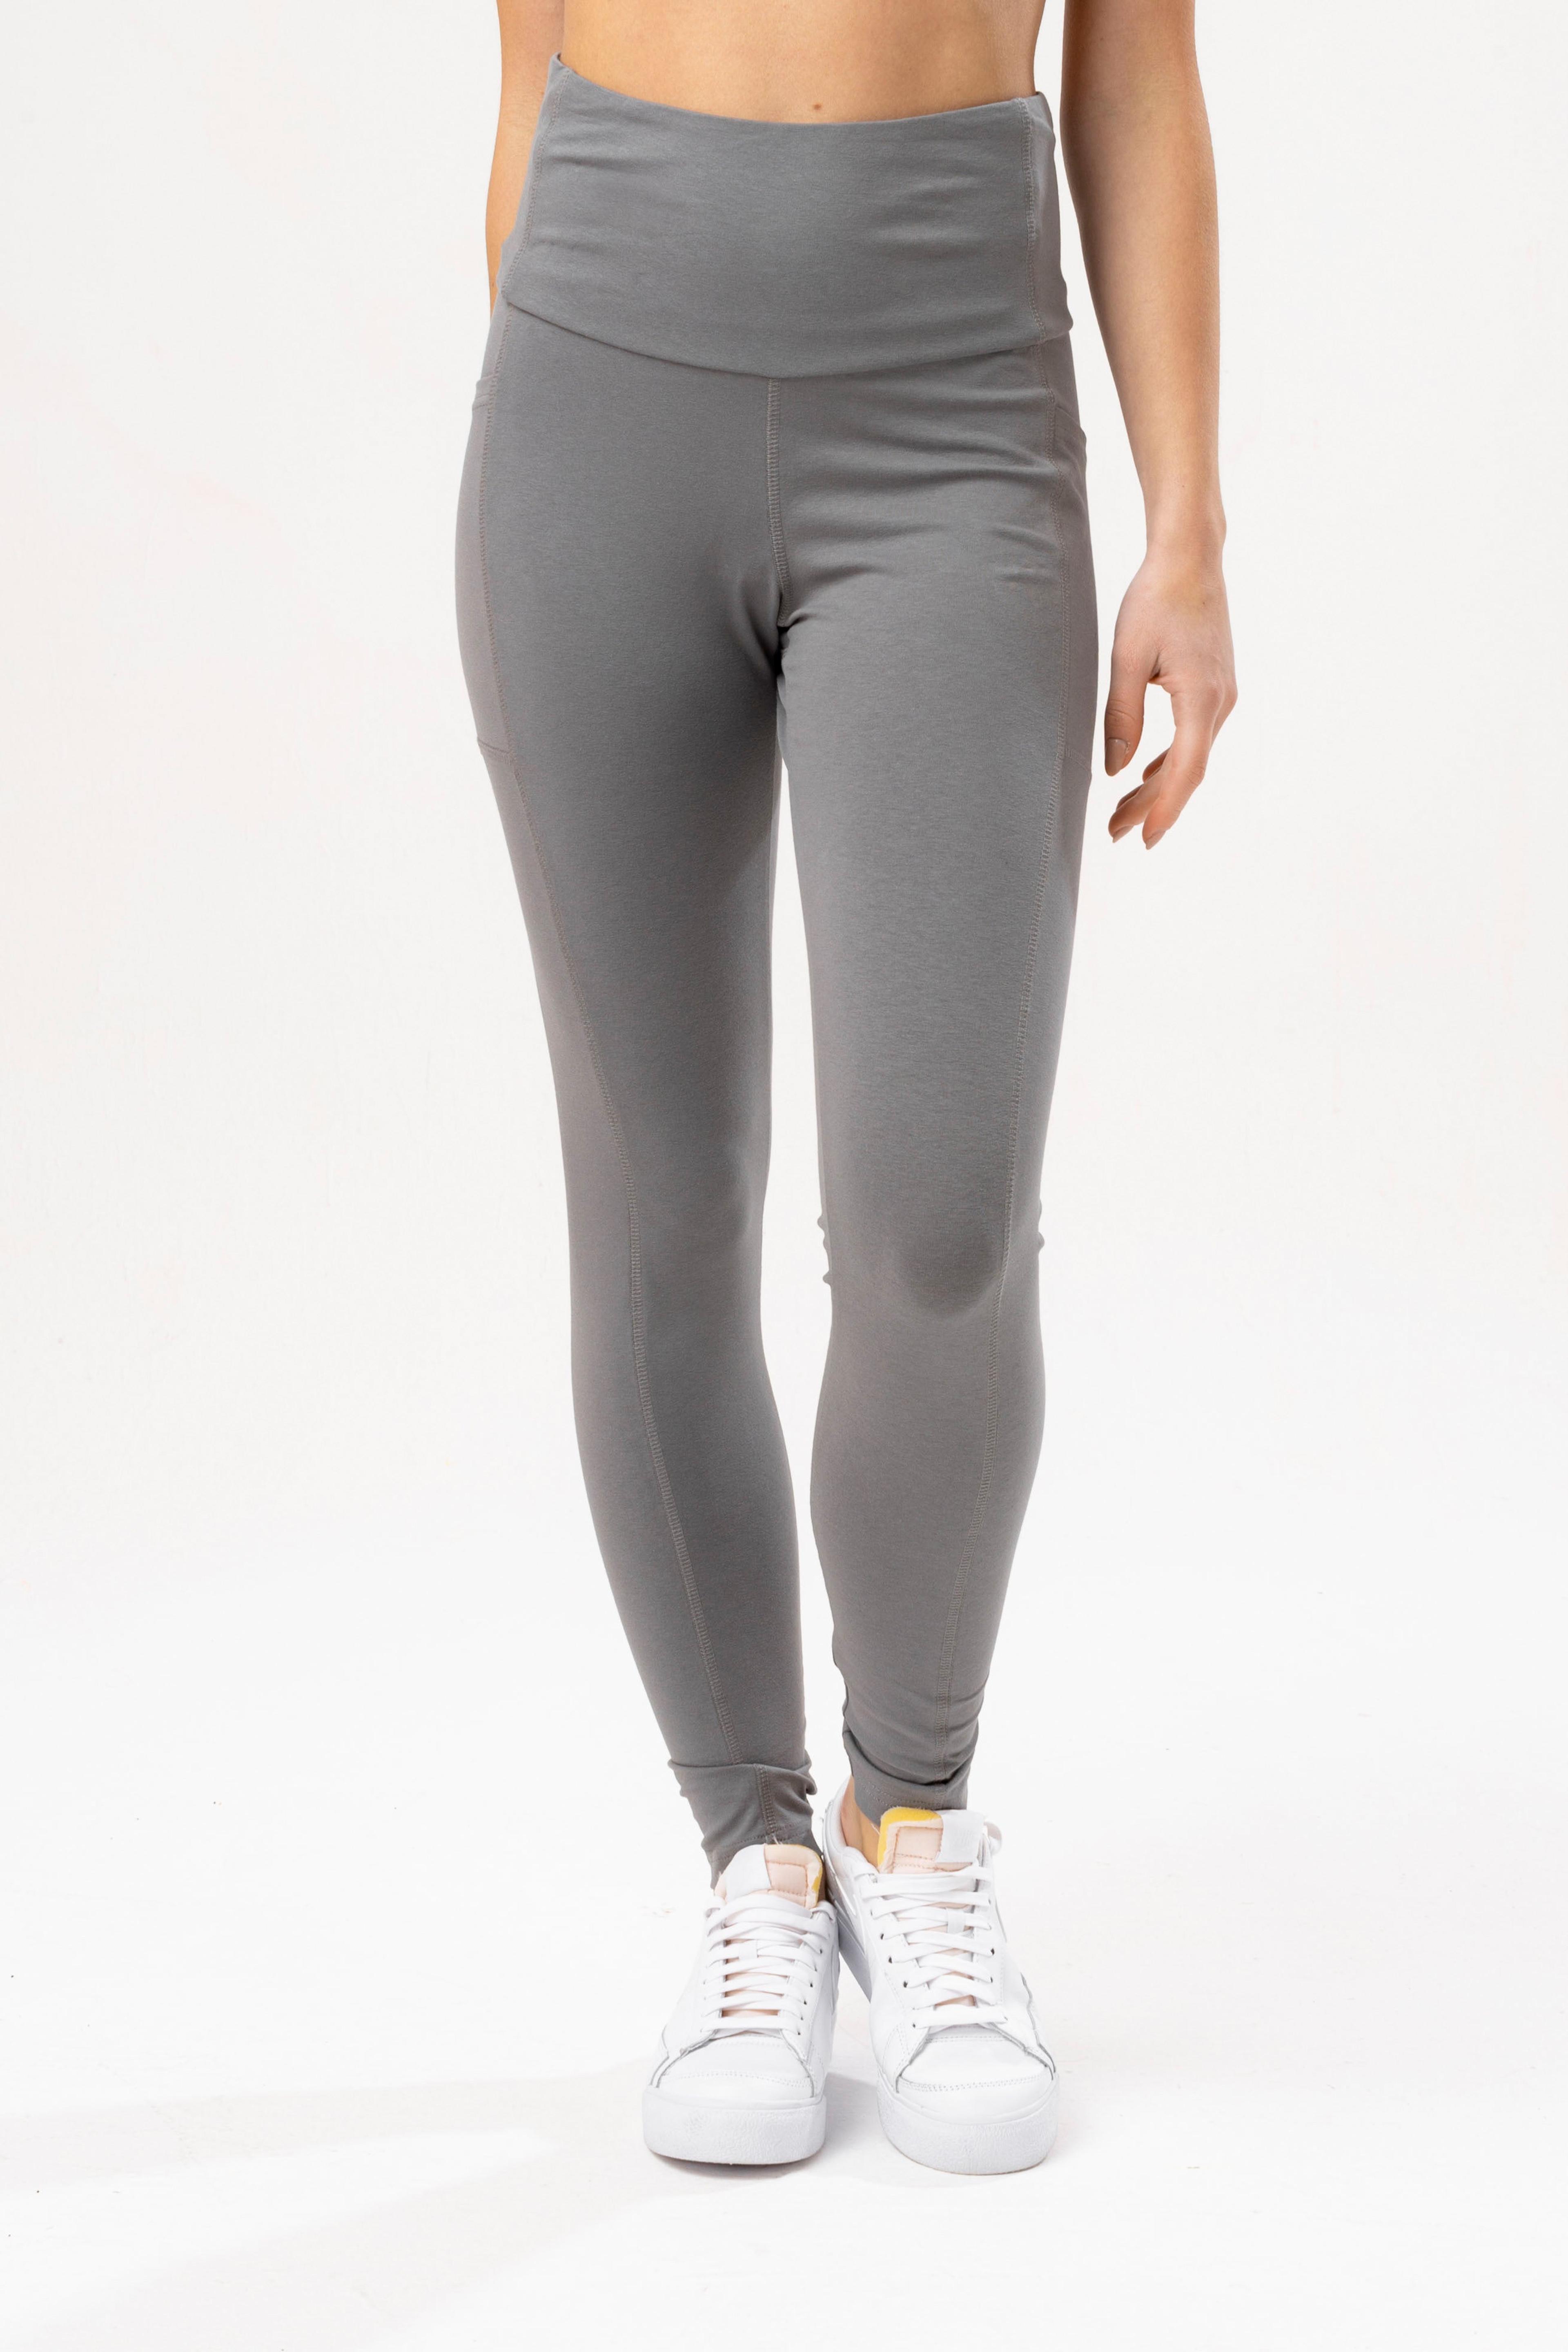 Alternate View 4 of HYPE WOMENS CHARCOAL ACTIVE SCRIBBLE LEGGINGS